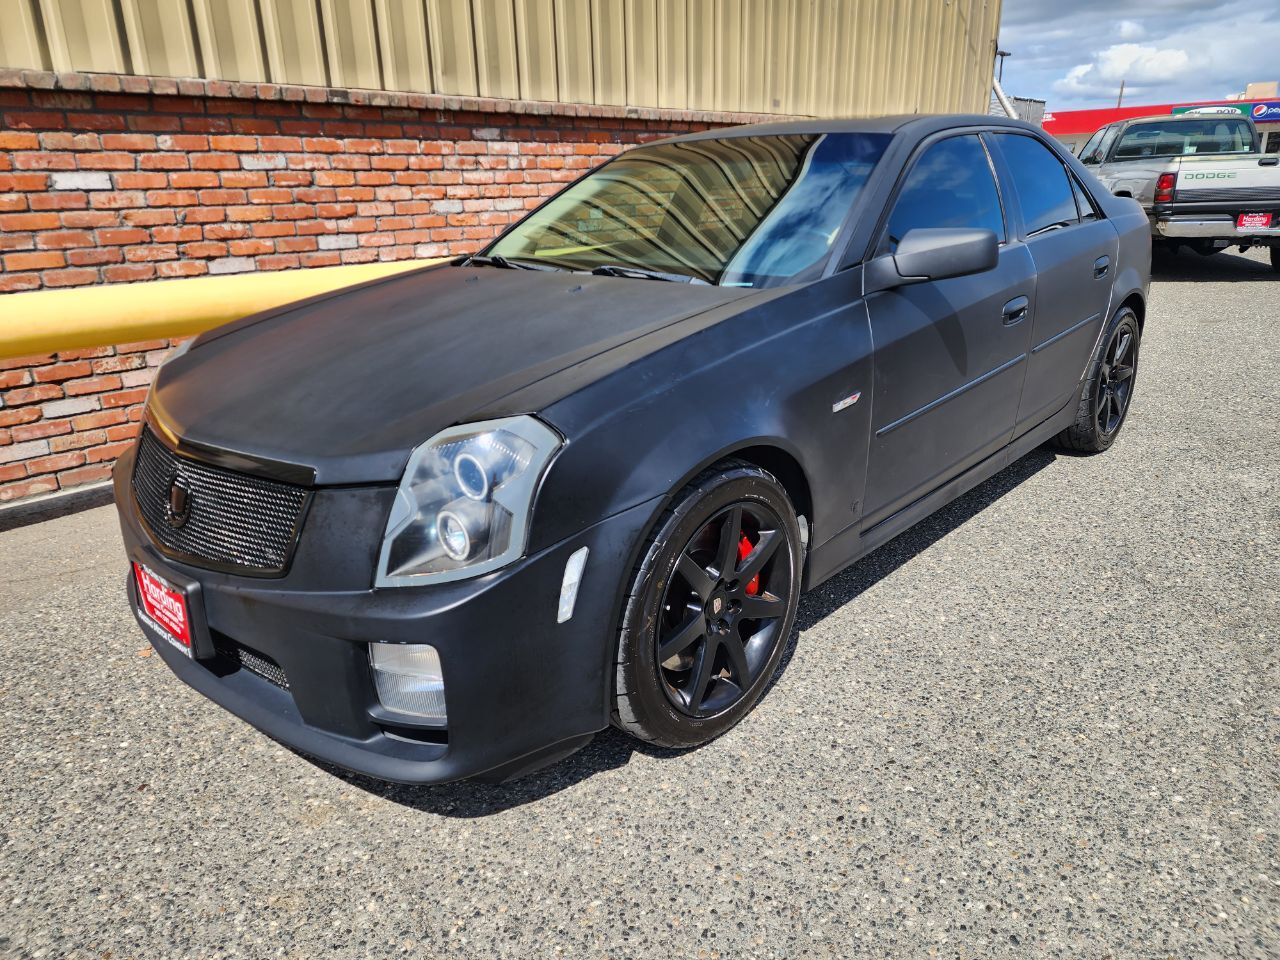 2006 Cadillac CTS-V For Sale - Carsforsale.com®